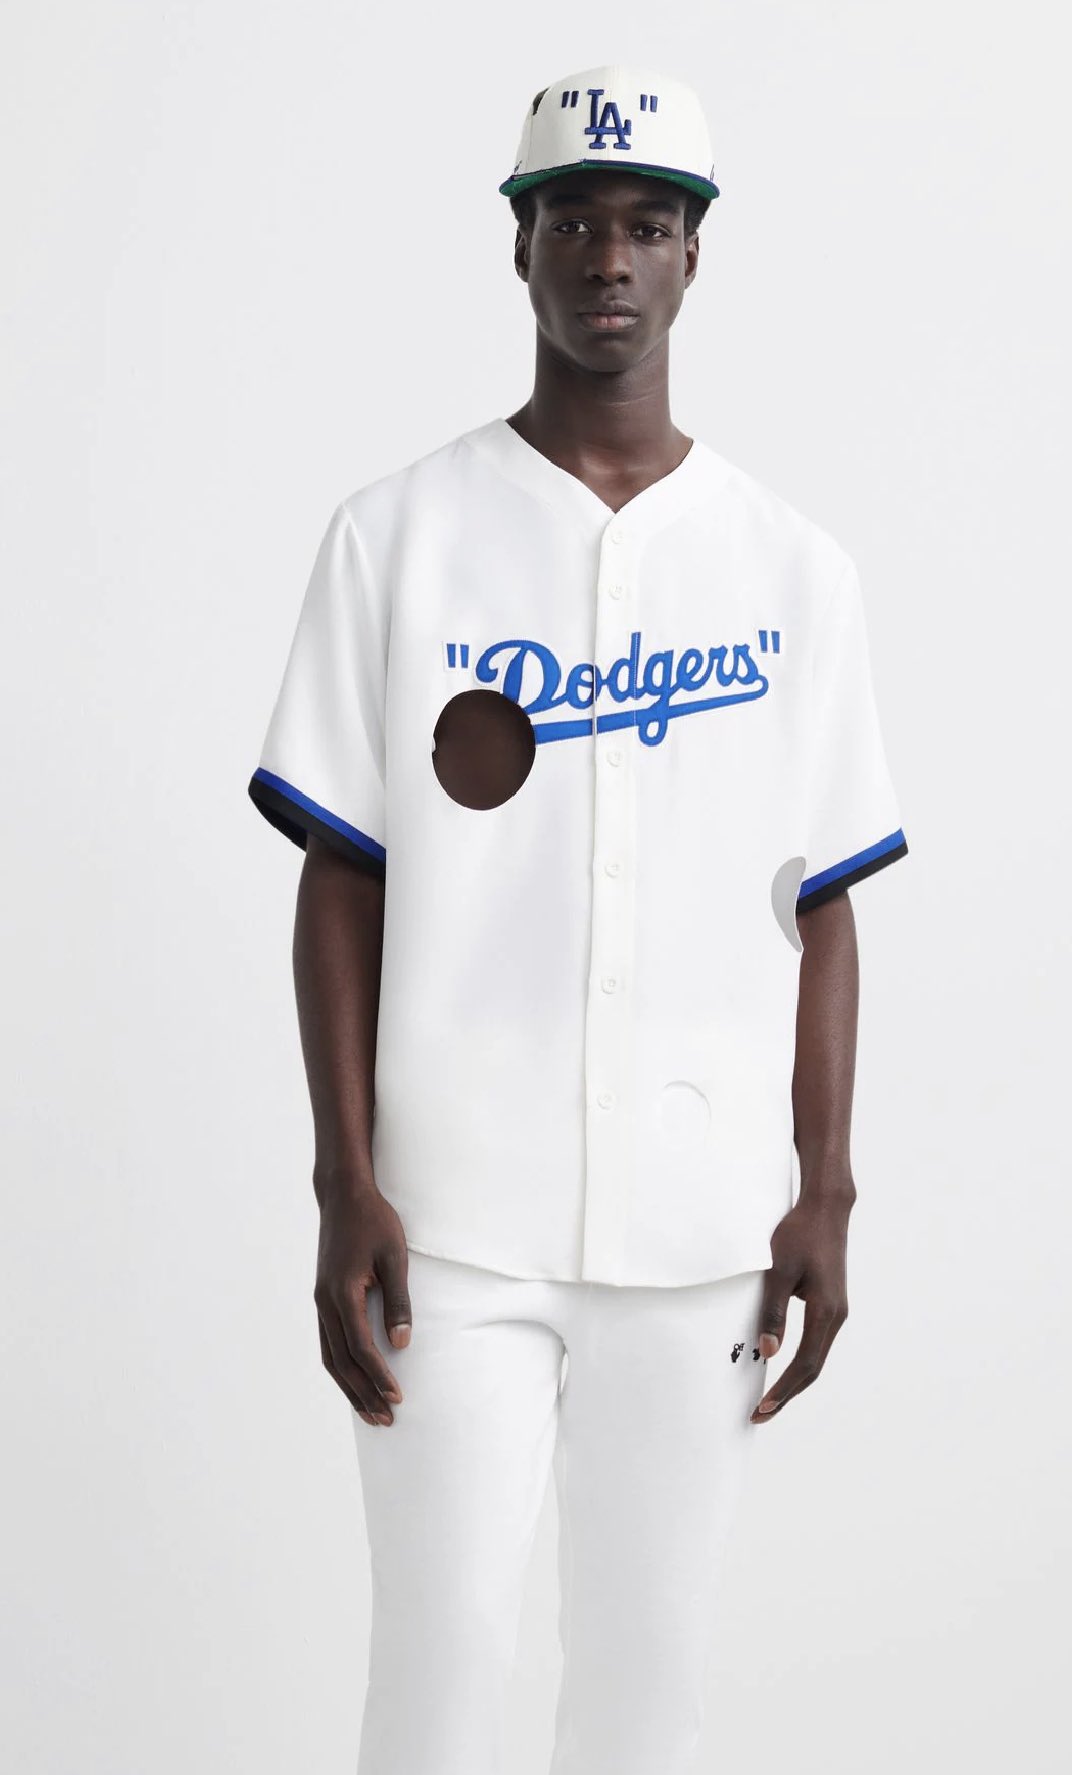 Darren Rovell on X: Off White unveils MLB licensed collaboration